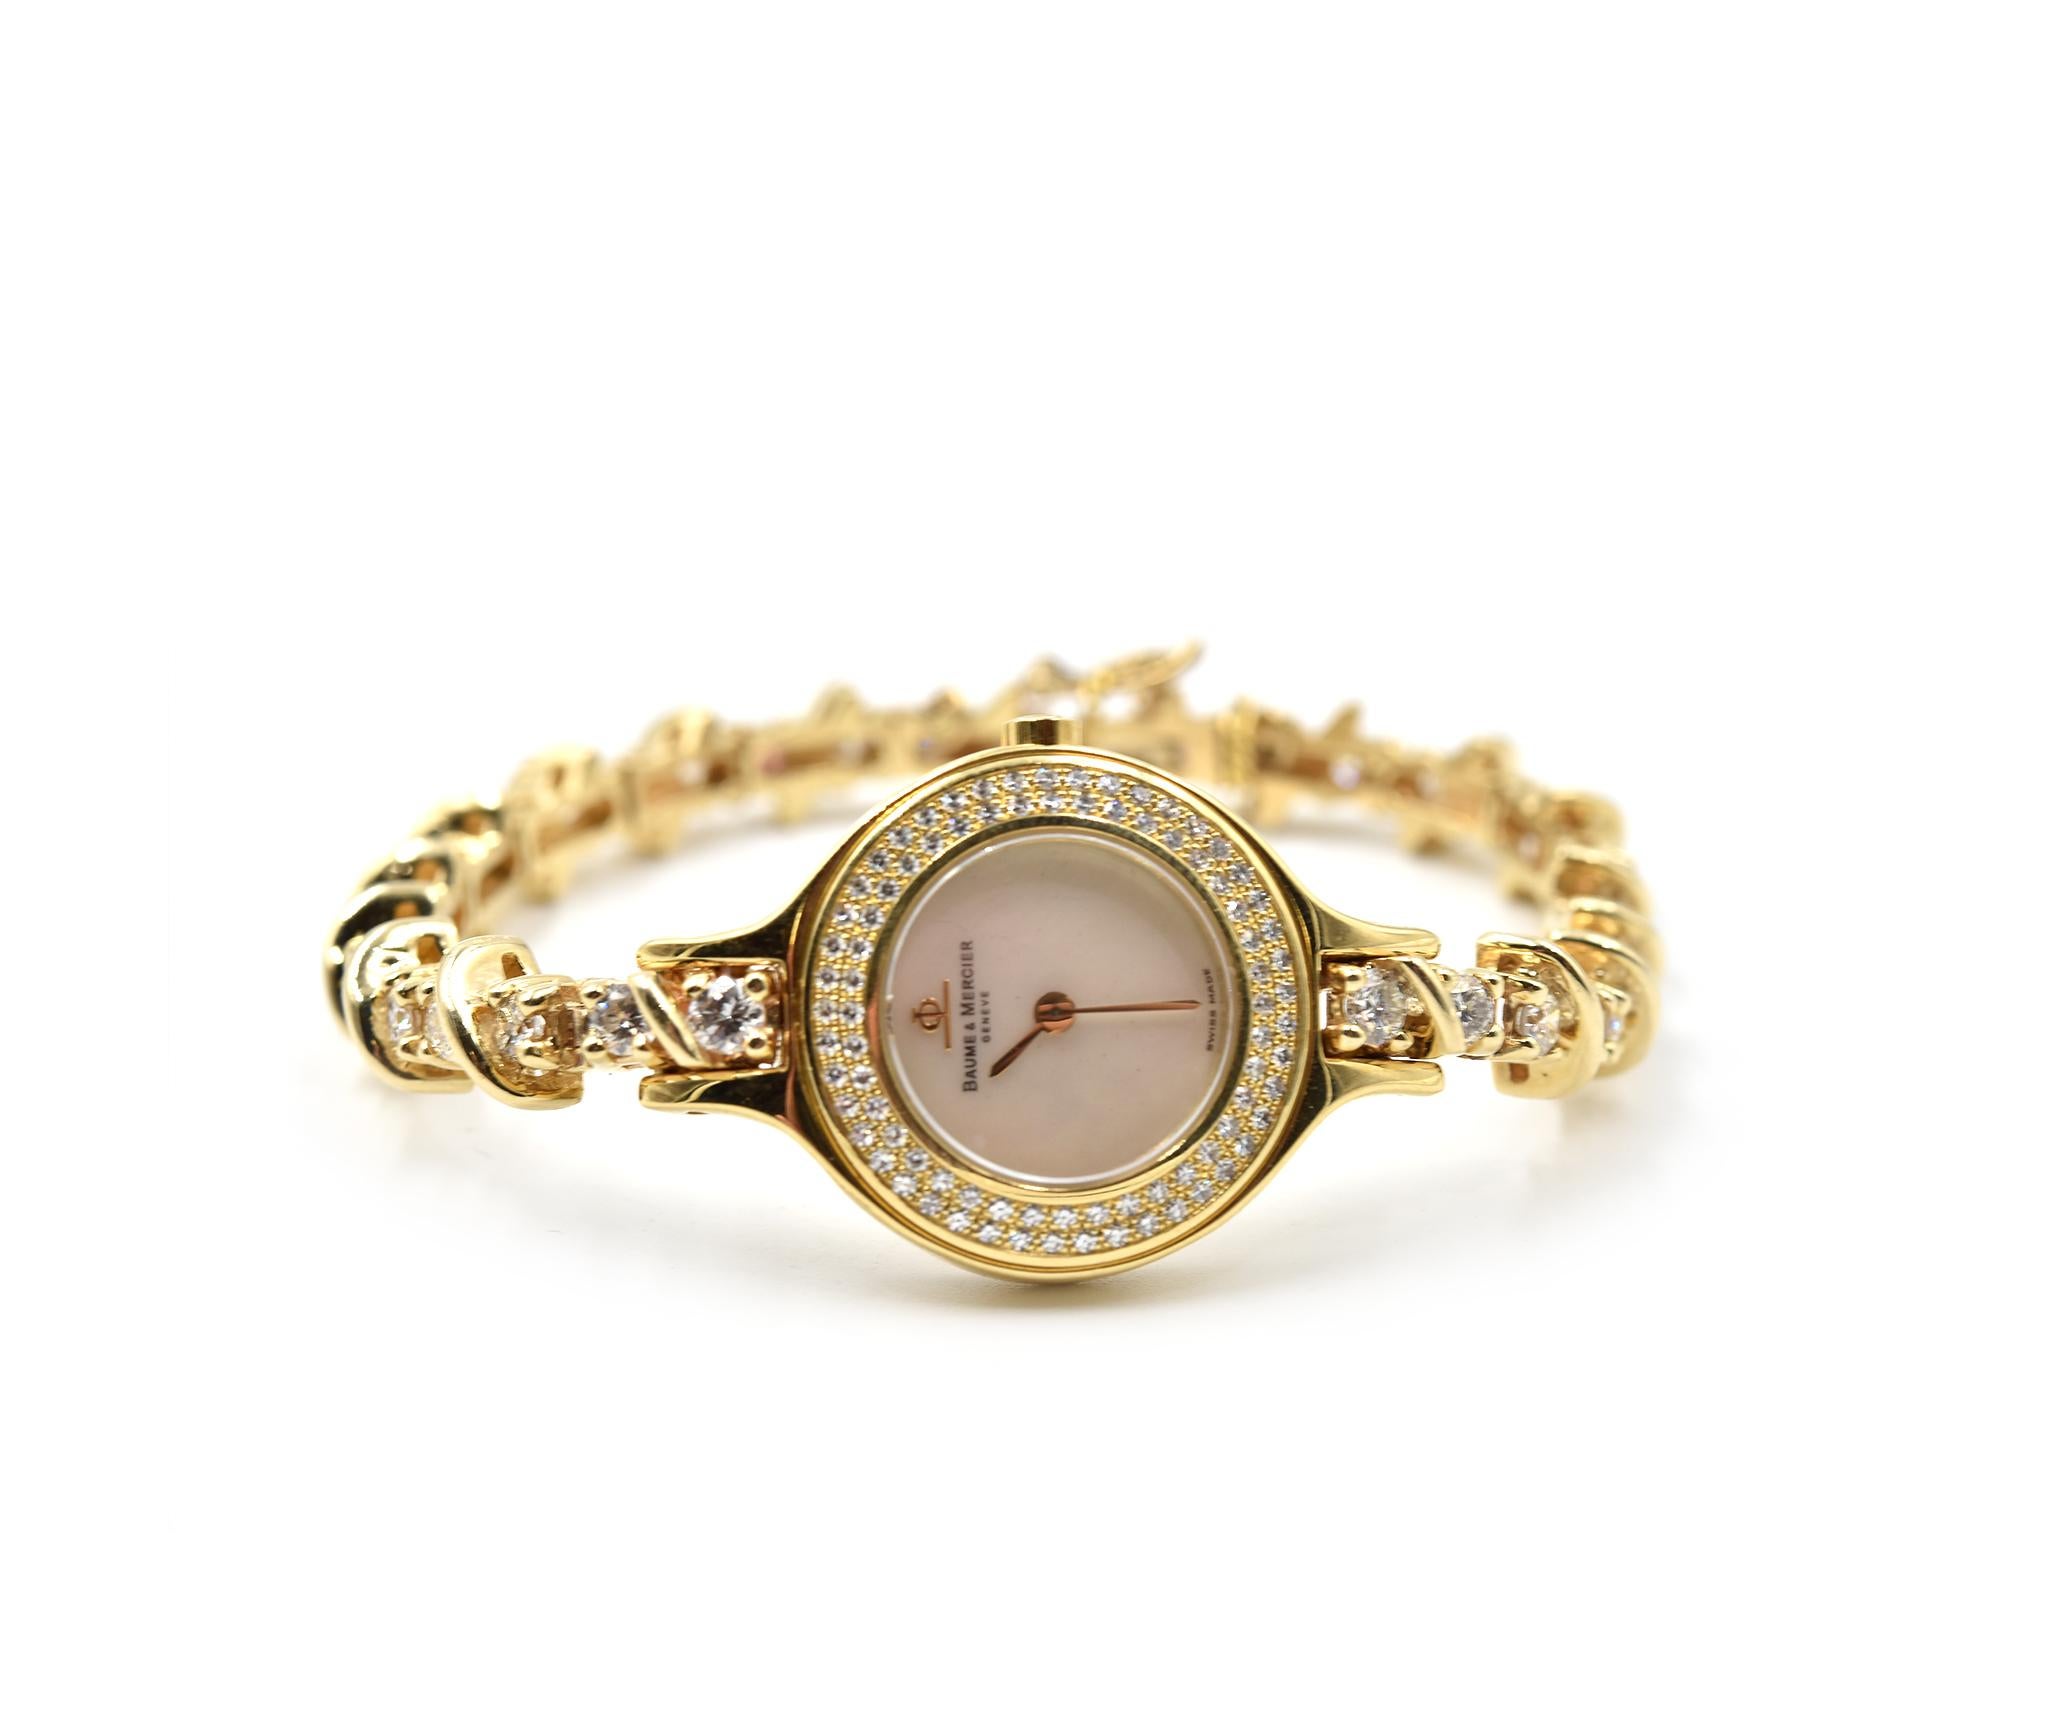 Movement: quartz
Function: hours, minutes
Case: round 21mm 18k yellow gold case with diamond bezel, crystal, pull/push gold crown, solid case back
Band: custom 18k yellow gold diamond bracelet with jewelry clasp
Dial: mother of pearl dial with gold